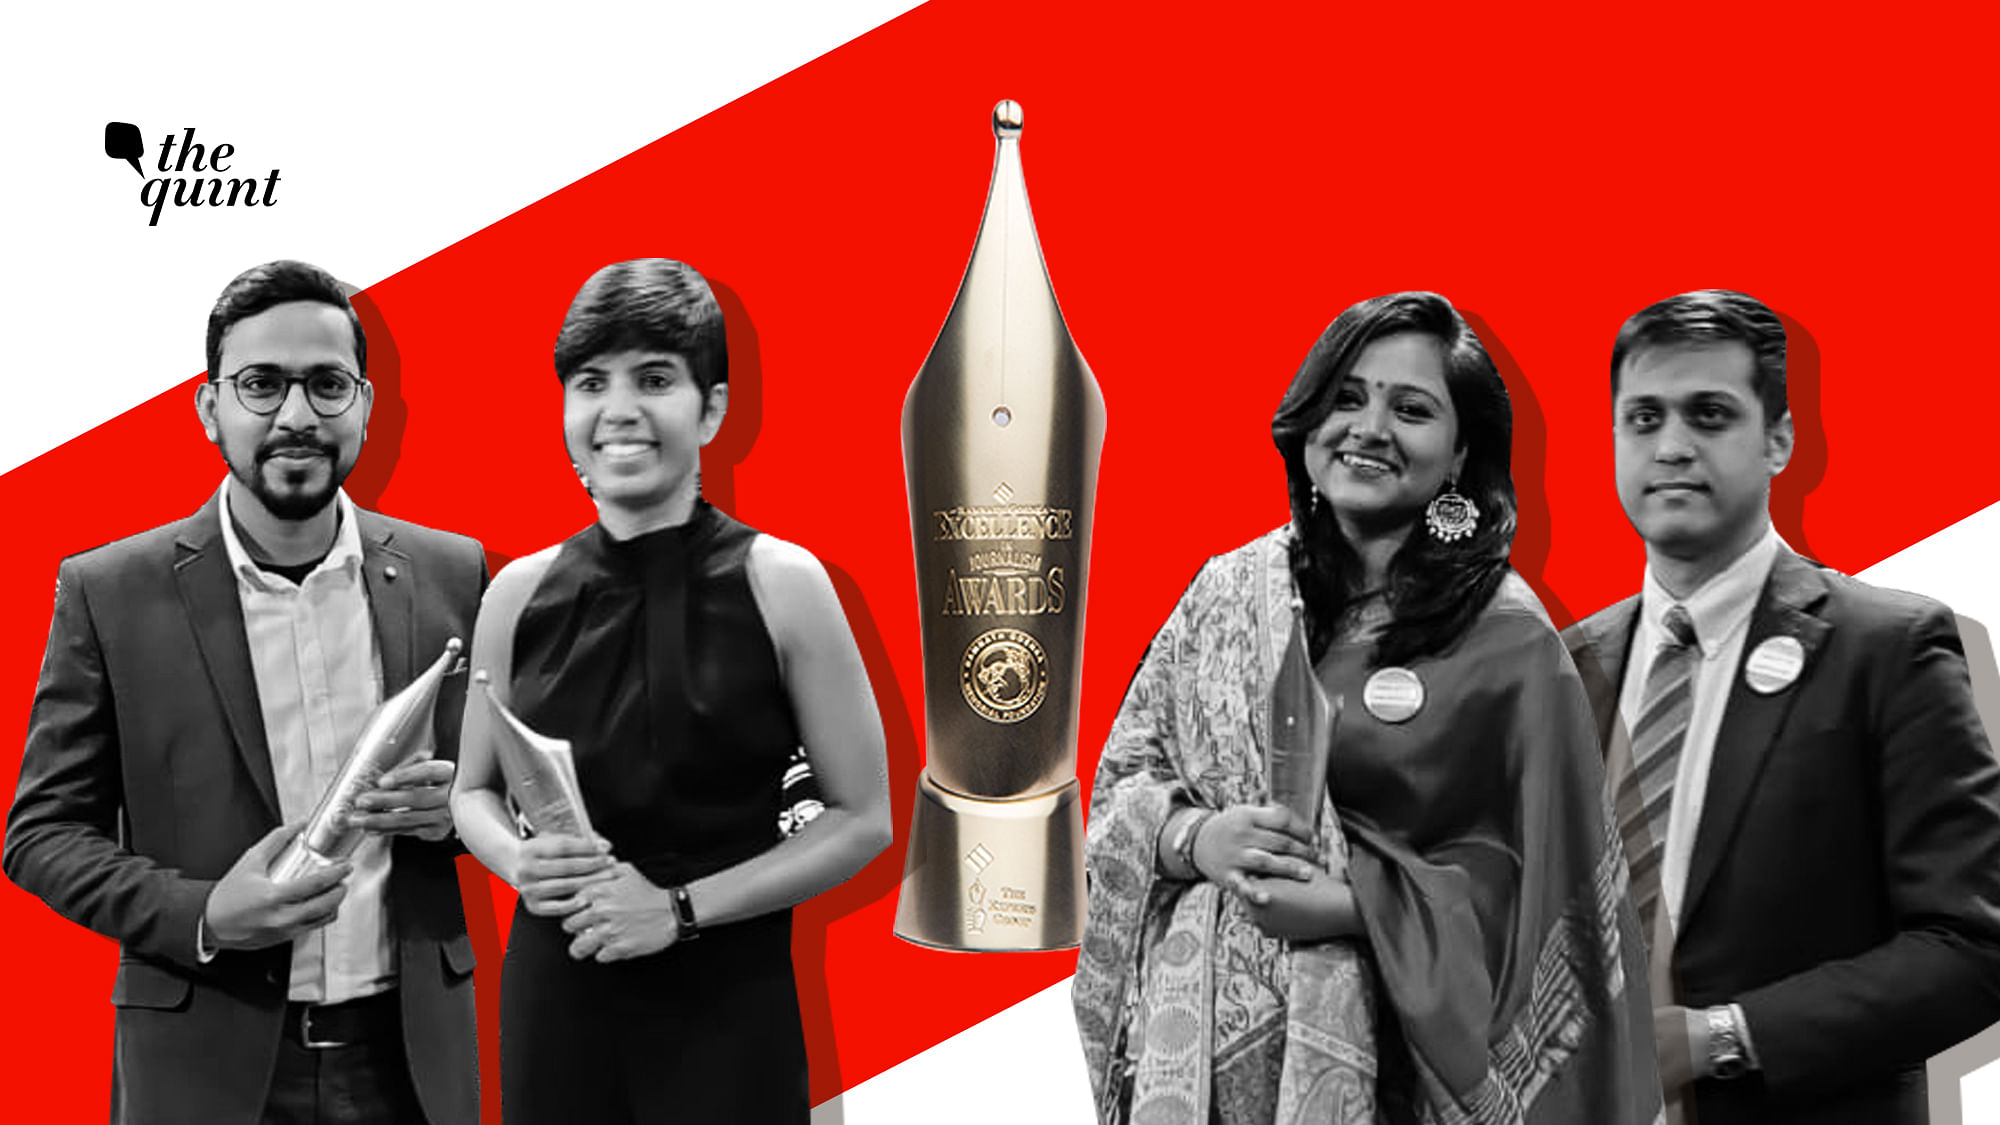 The Quint Wins 3 Ramnath Goenka Excellence in Journalism Awards in 2020